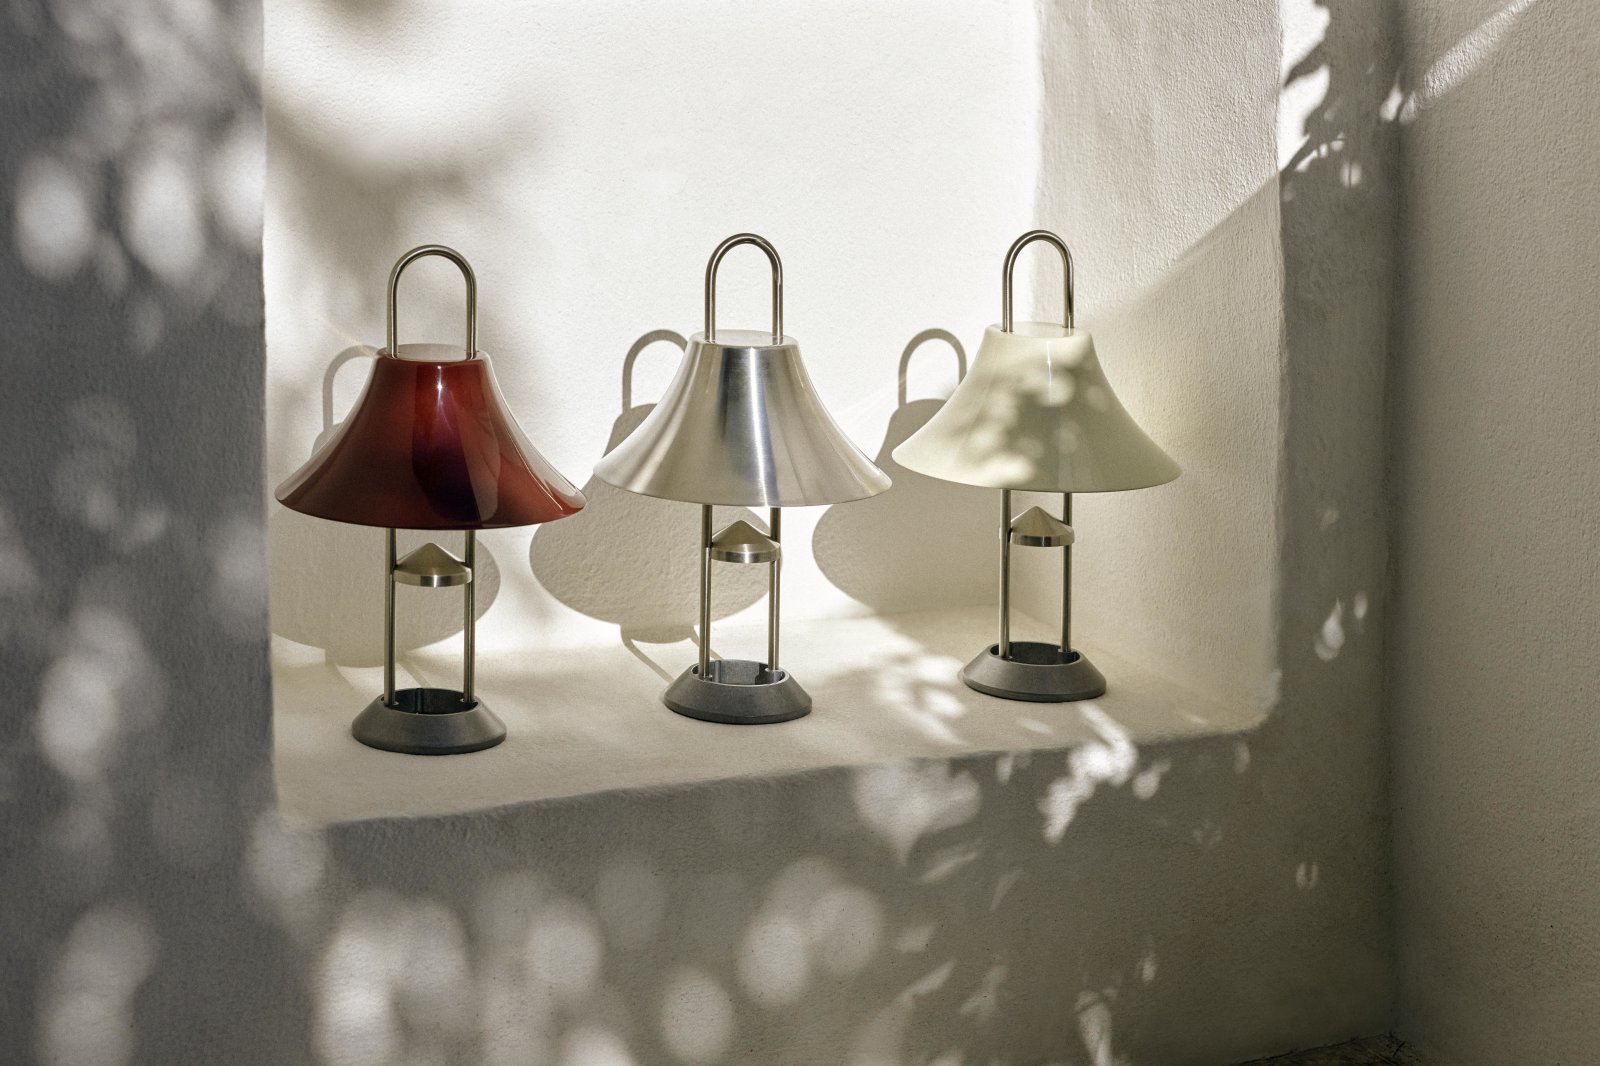 Mousqueton Lamp iron red_brushed stainless steel_oyster white.jpg